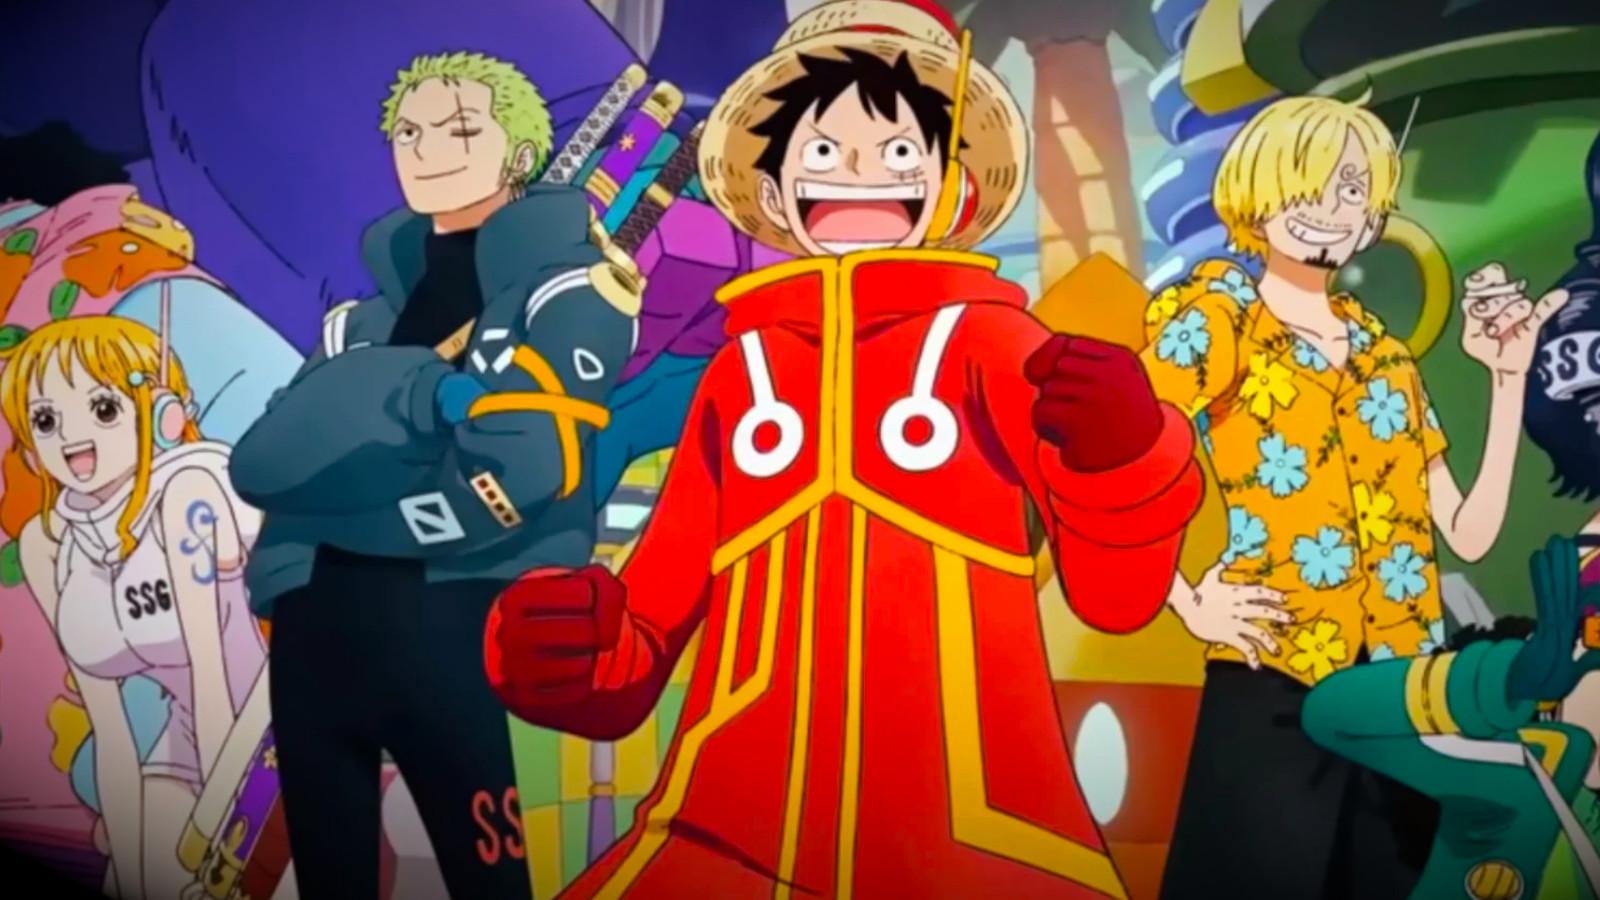 Monkey D Luffy and the crew from One Piece Final Saga